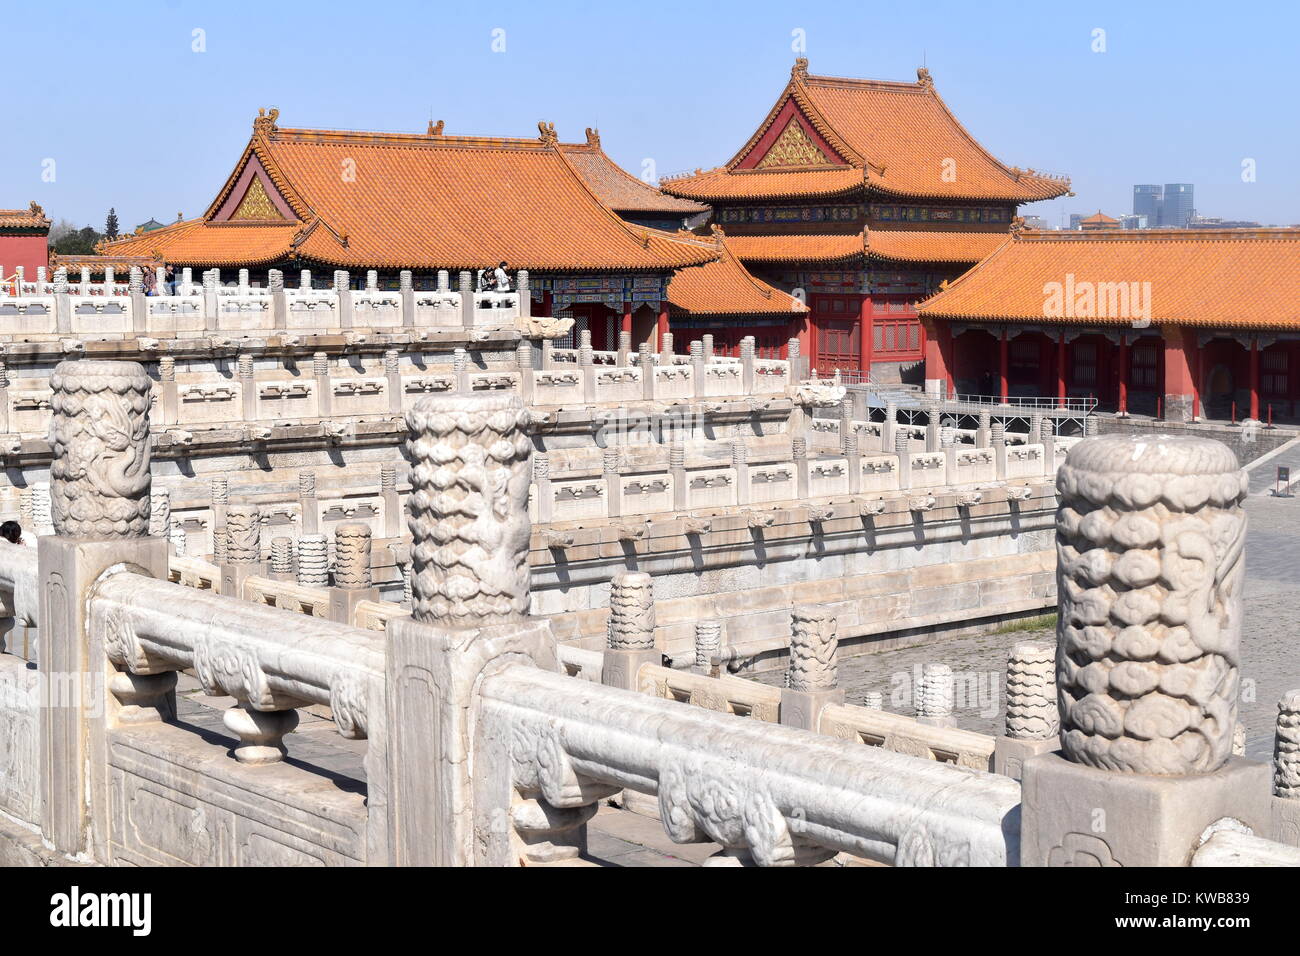 Marble terraces inside the Imperial palace forbidden city and bas-relief carvings - Beijing, China Stock Photo